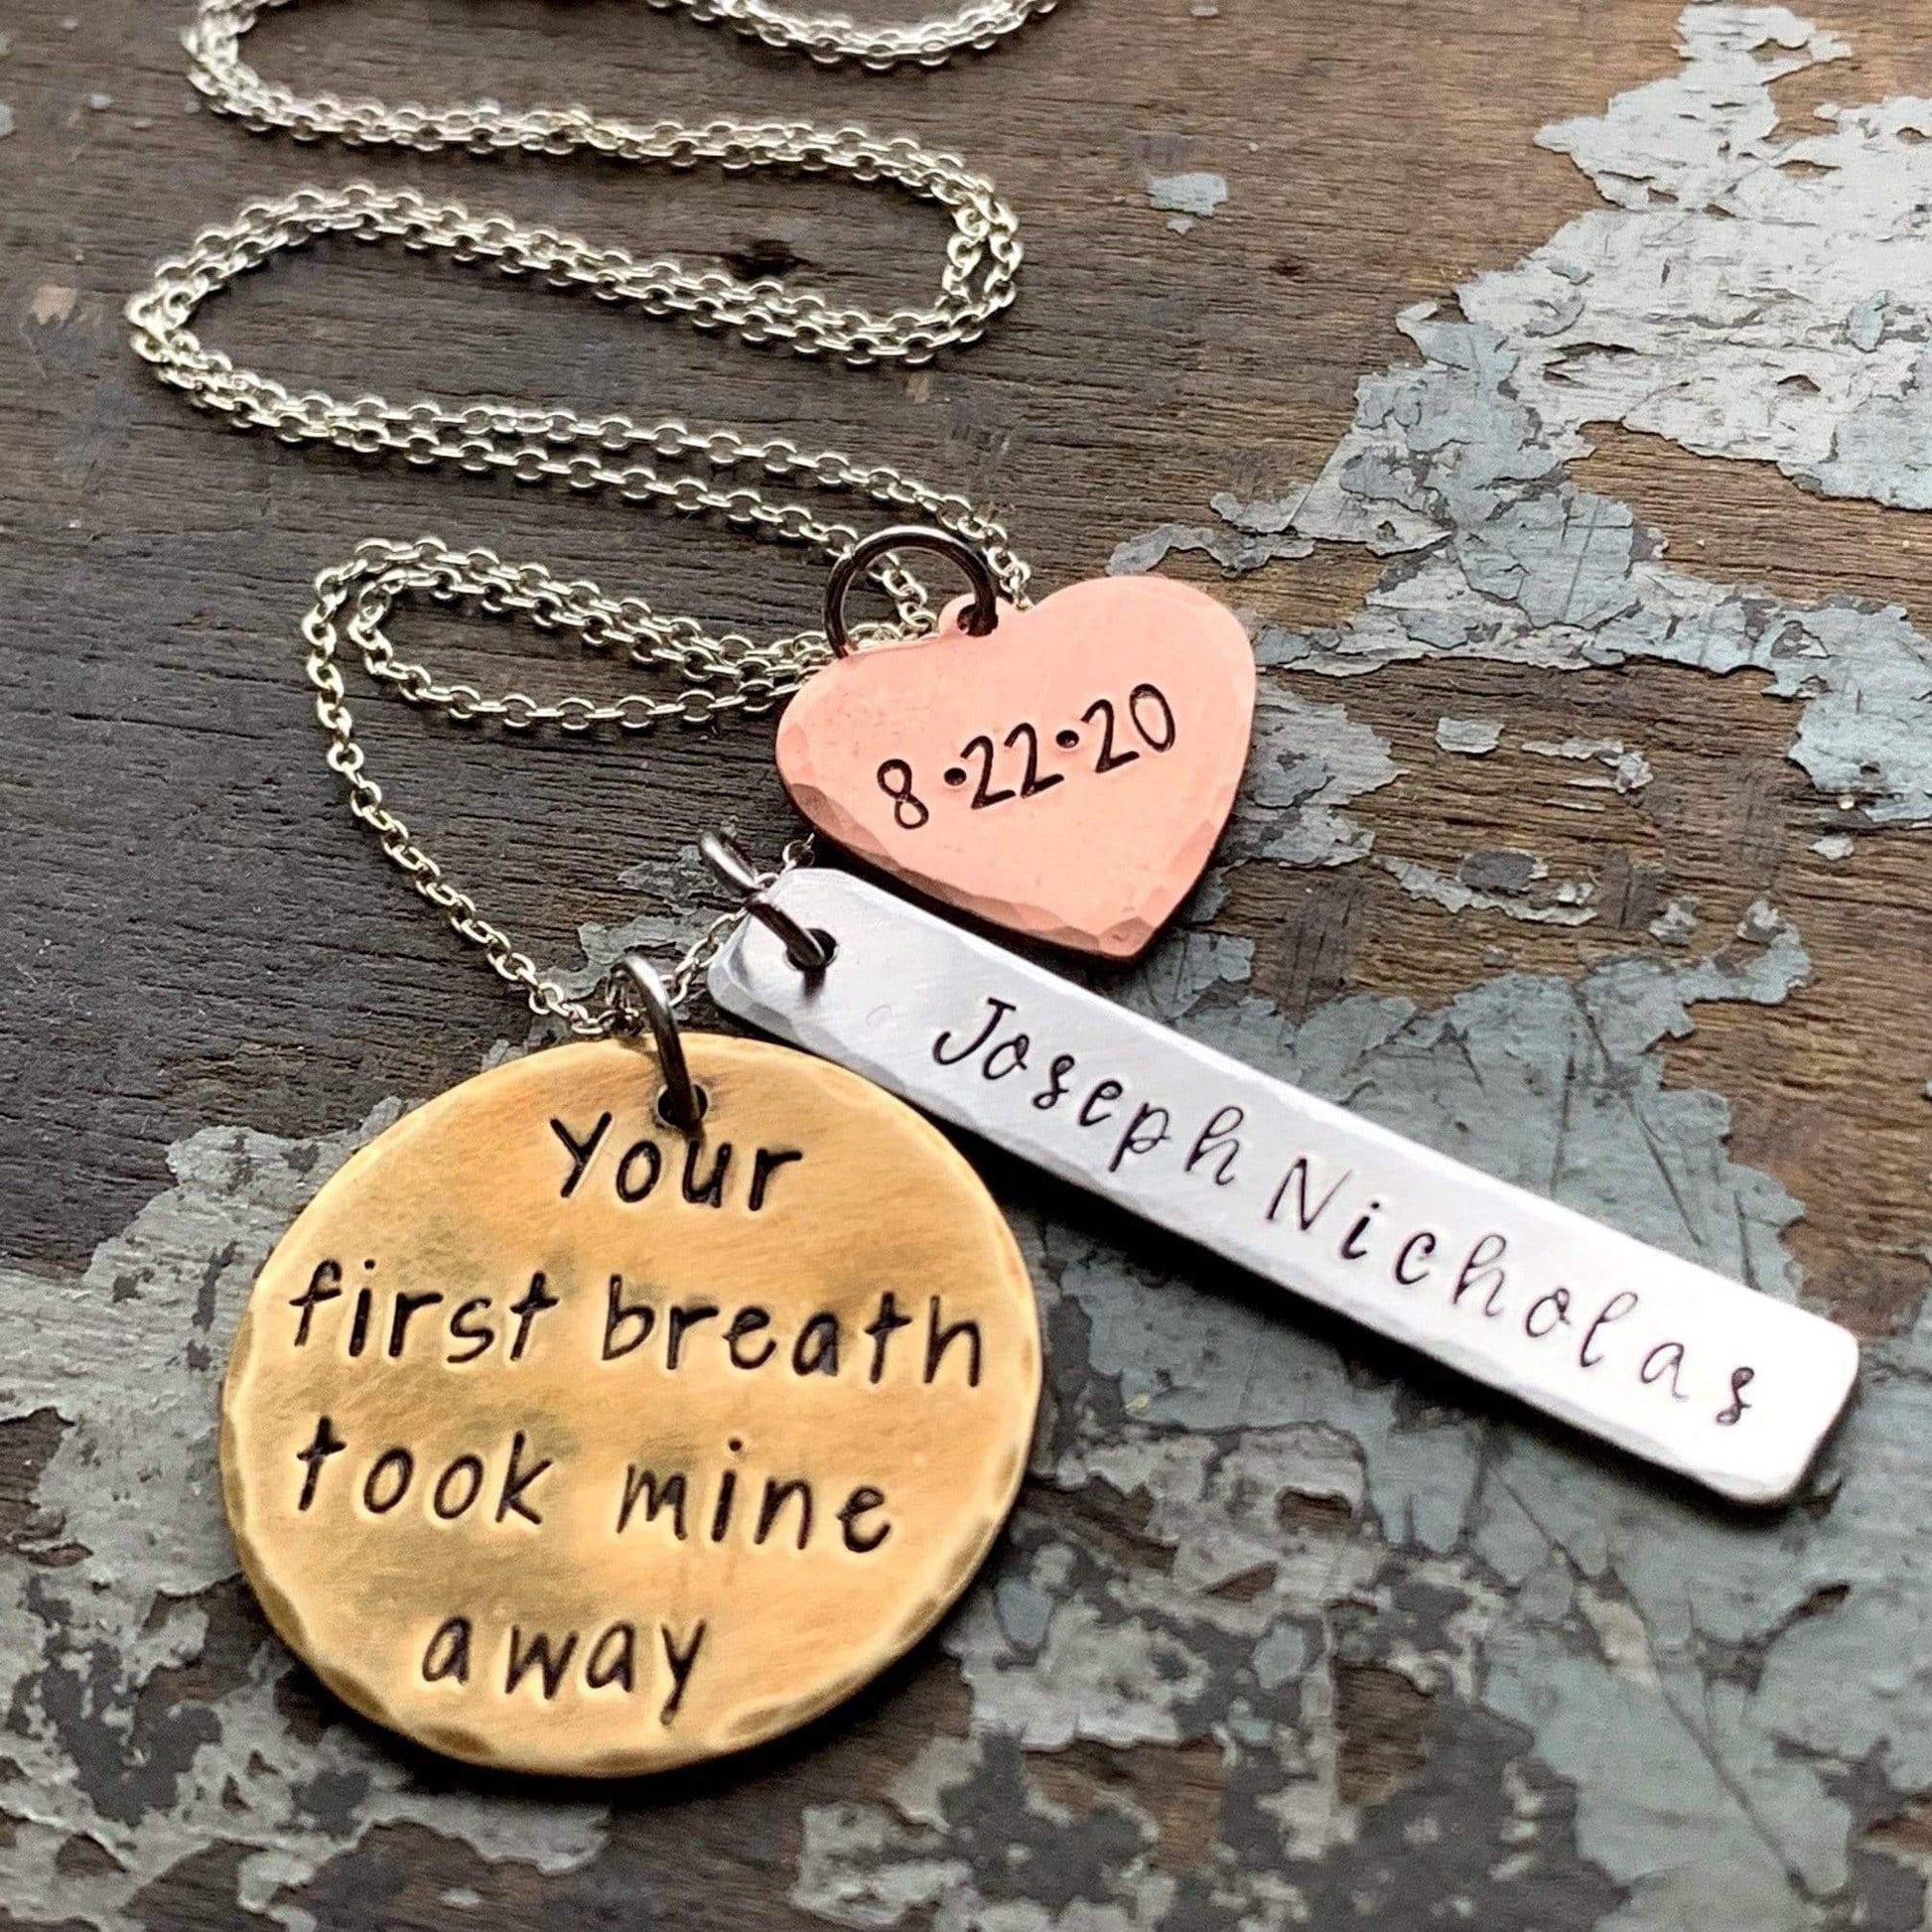 Your First Breath Took Mine Away Personalized Necklace, Gift for New Mom - KyleeMae Designs